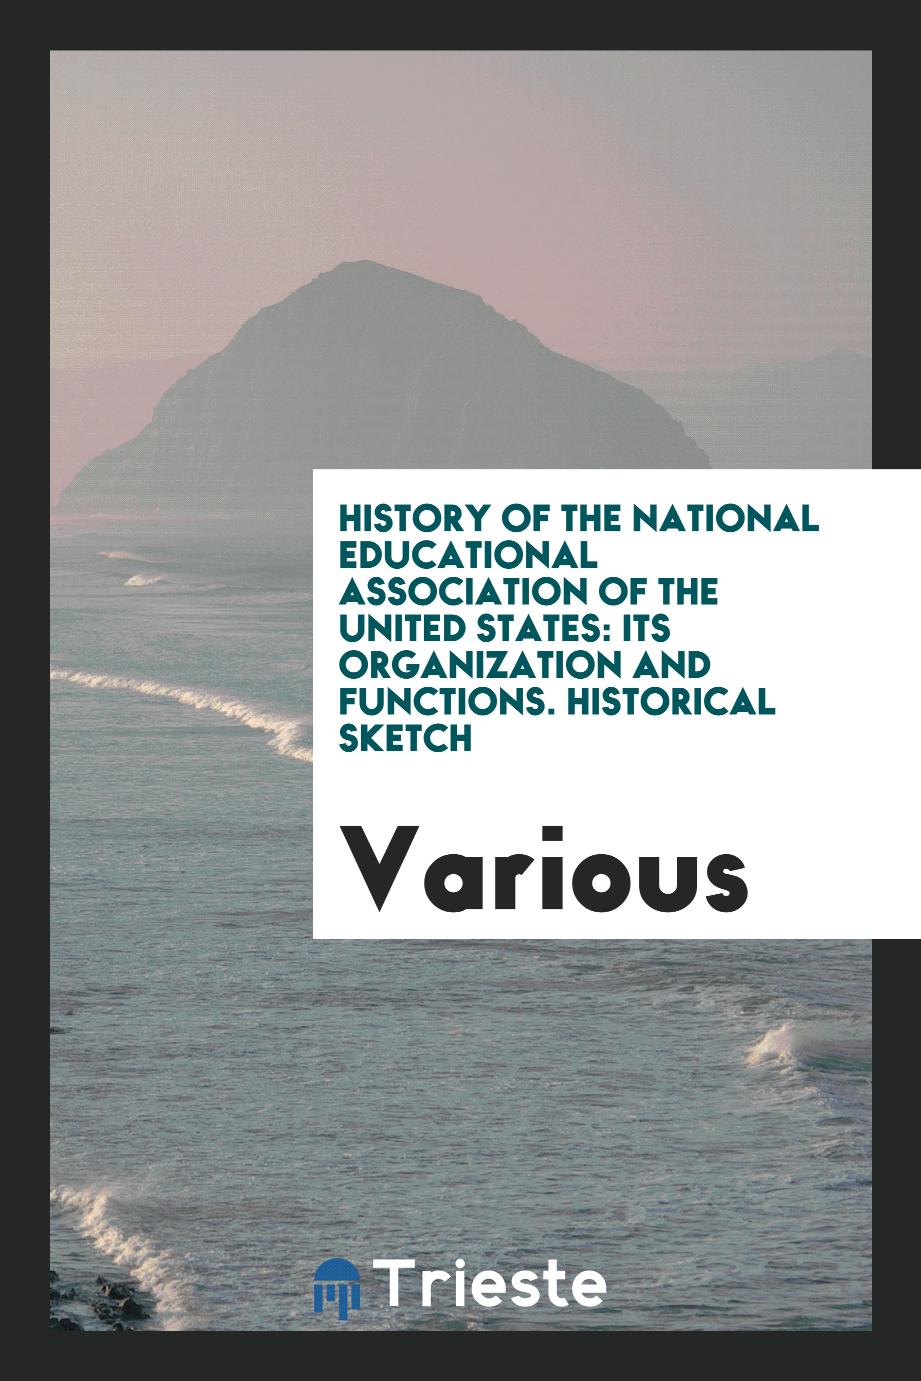 History of the National Educational Association of the United States: Its Organization and Functions. Historical Sketch